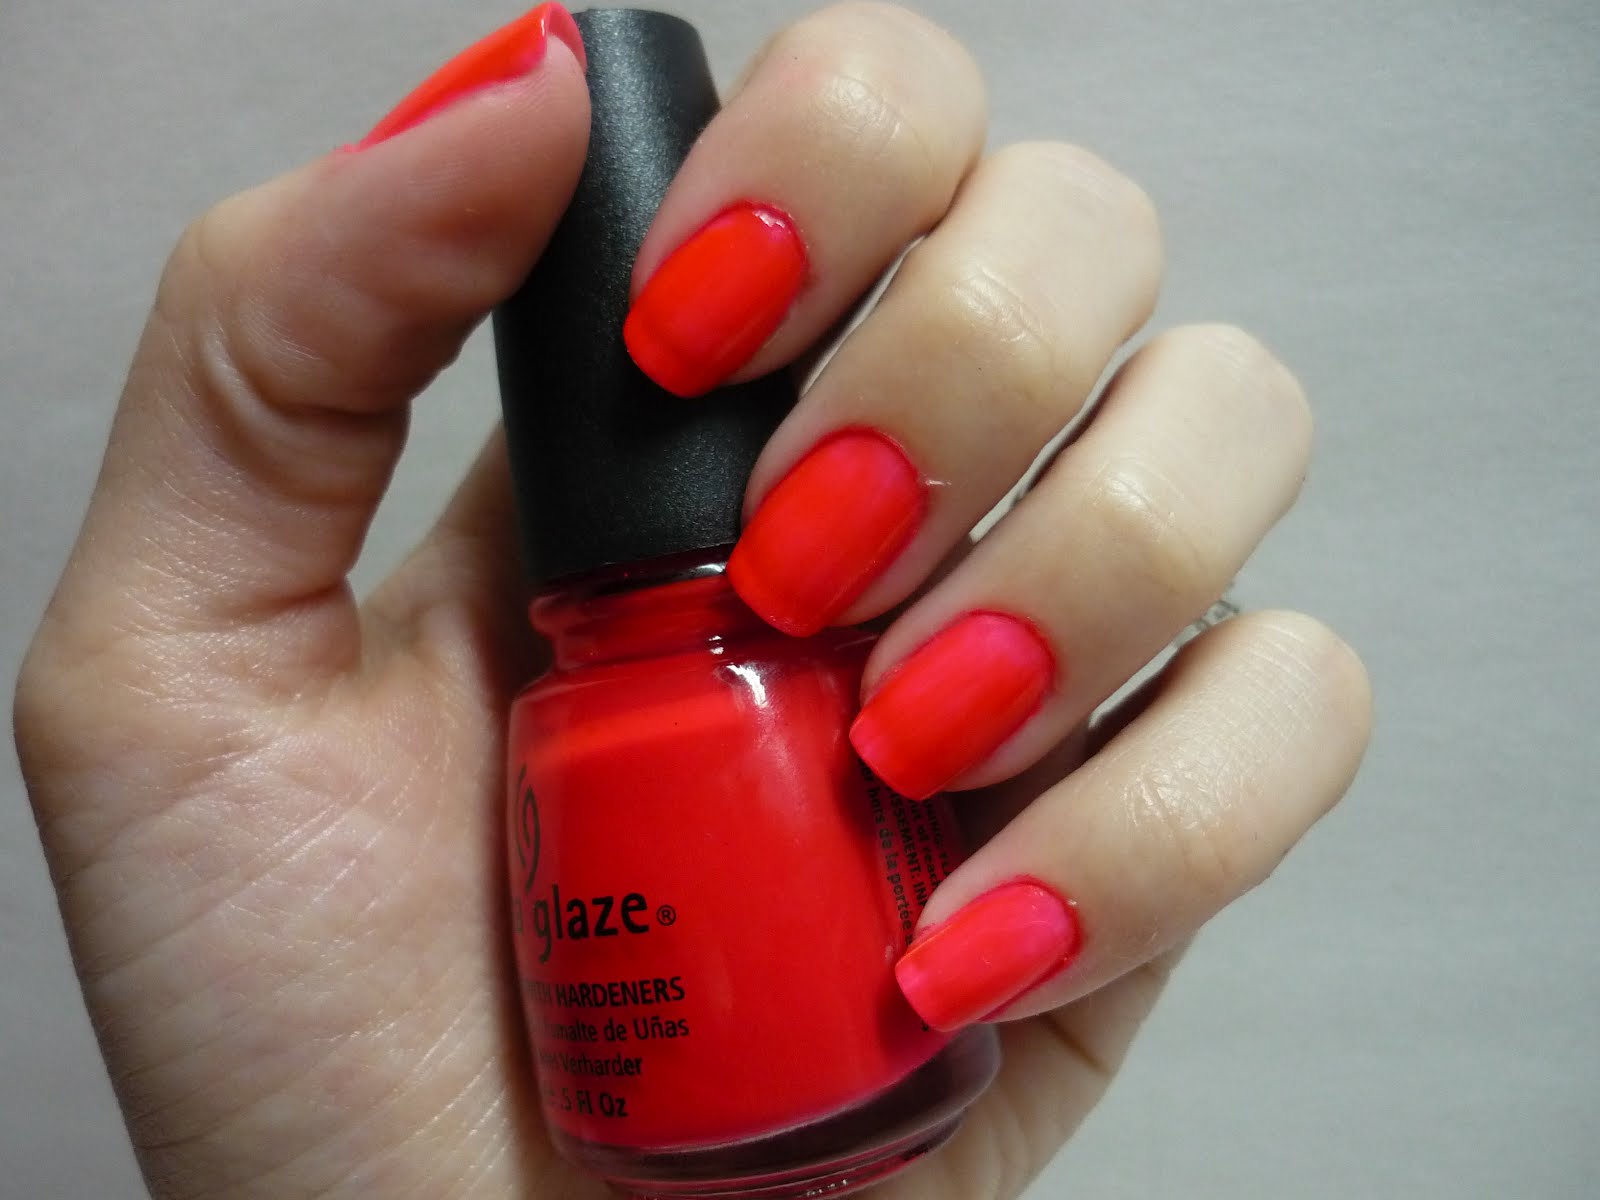 6. China Glaze Nail Lacquer in "Rose Among Thorns" - wide 2